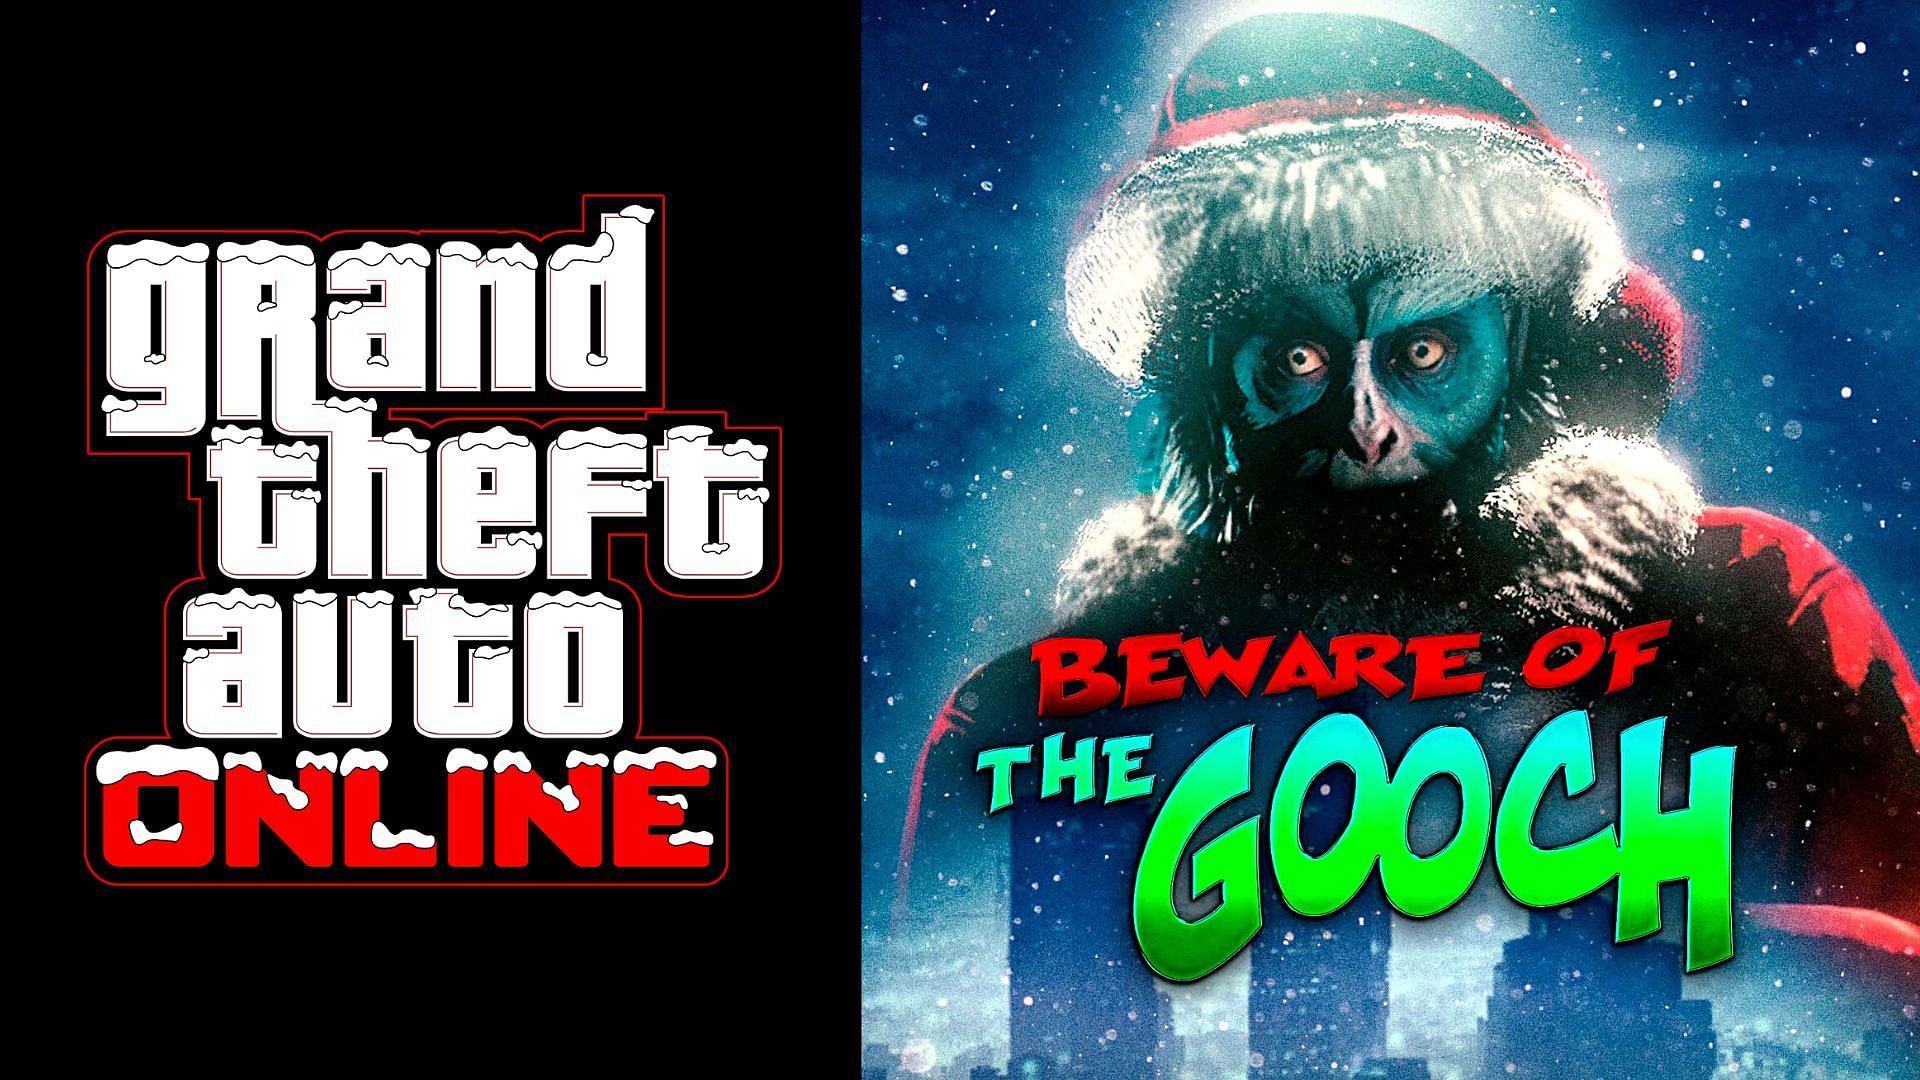 Everything to know about the Gooch in GTA Online Festive Surprise